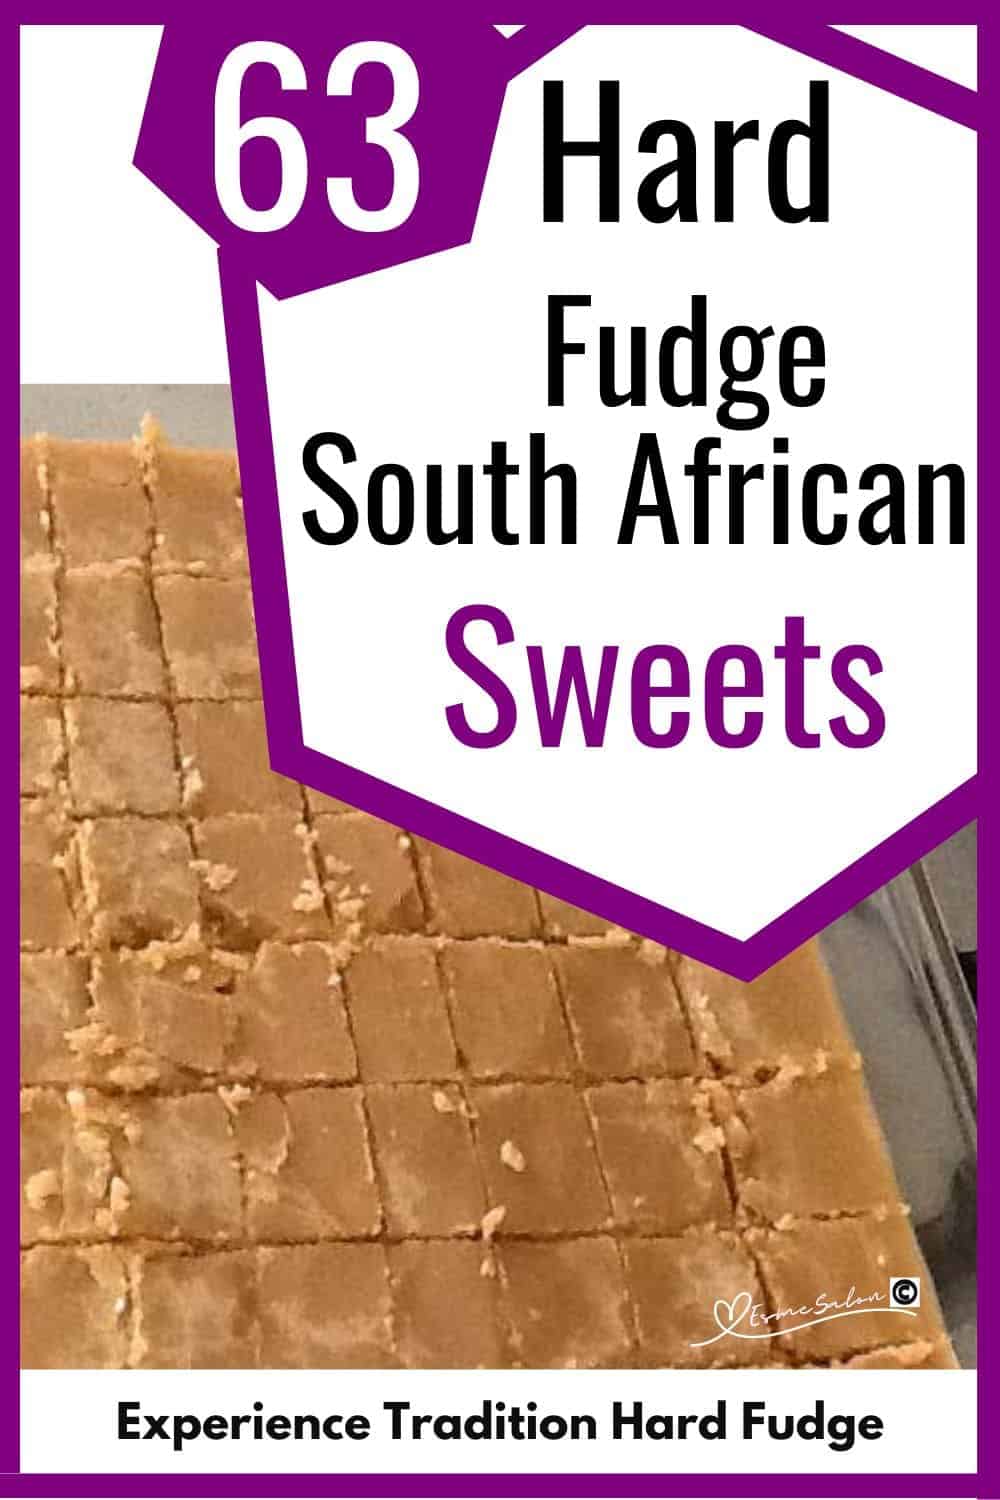 an image of a oblong Pyrex dish with Homemade South African Hard Fudge cut into cubes and ready to be enjoyed.